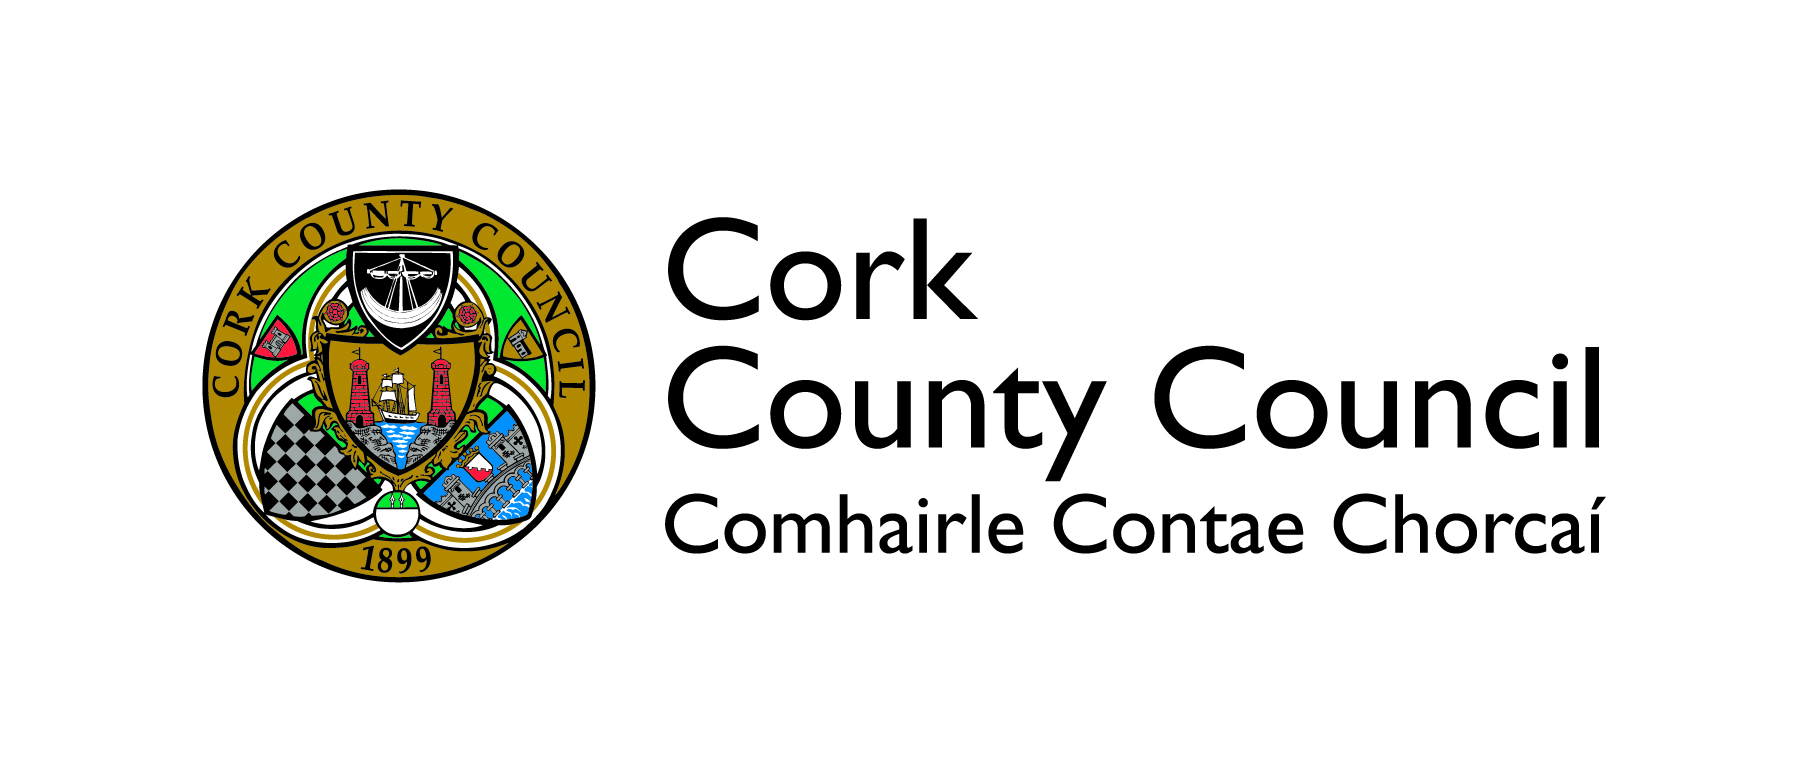 North Cork Community Projects Approved under County Cork Creative Ireland Grant Scheme 2020